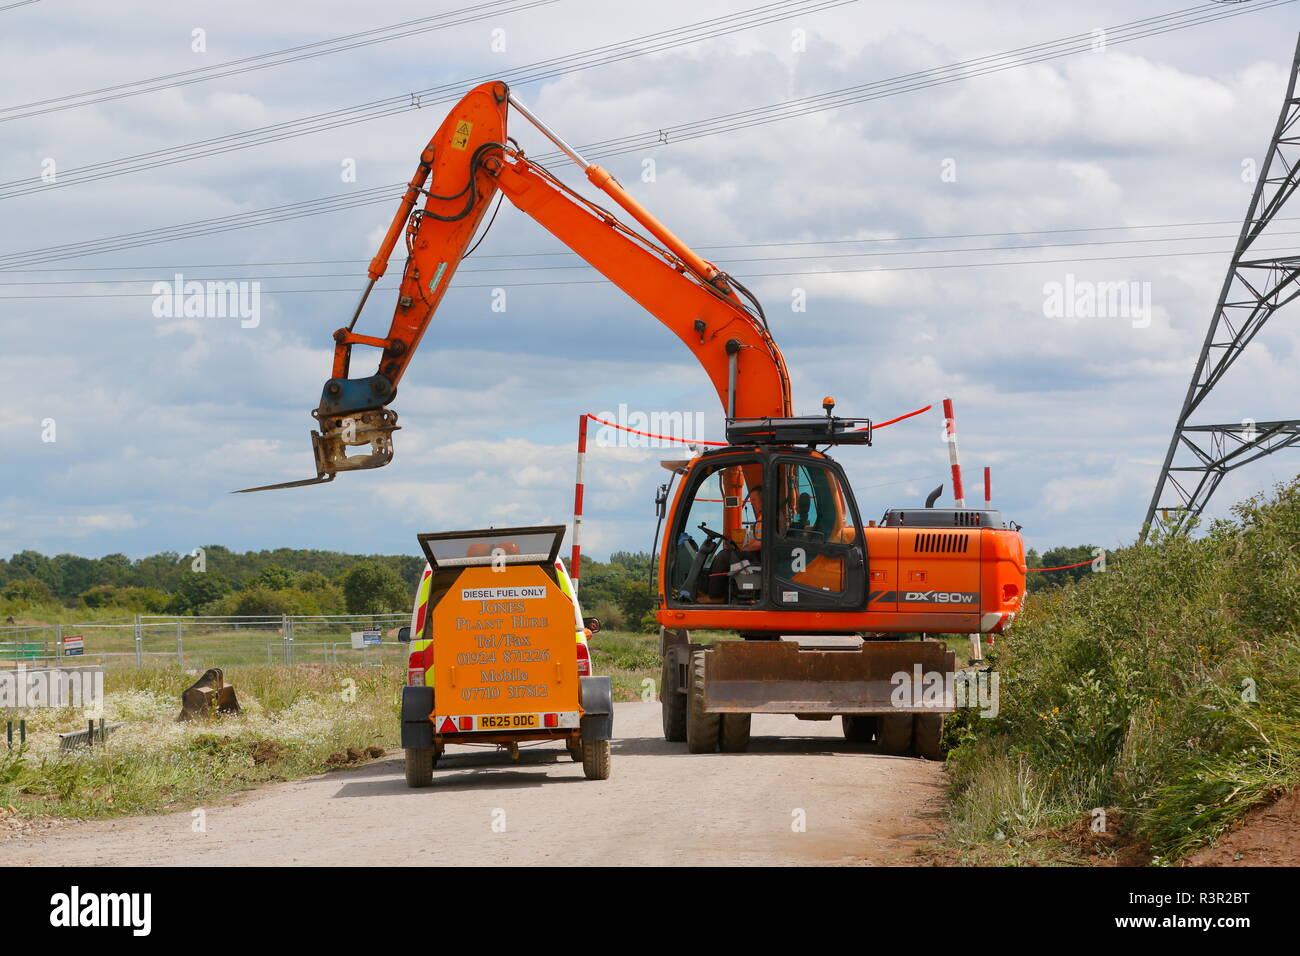 A machine about to be refuelled on the FARRRS link road in Doncaster,South Yorkshire Stock Photo